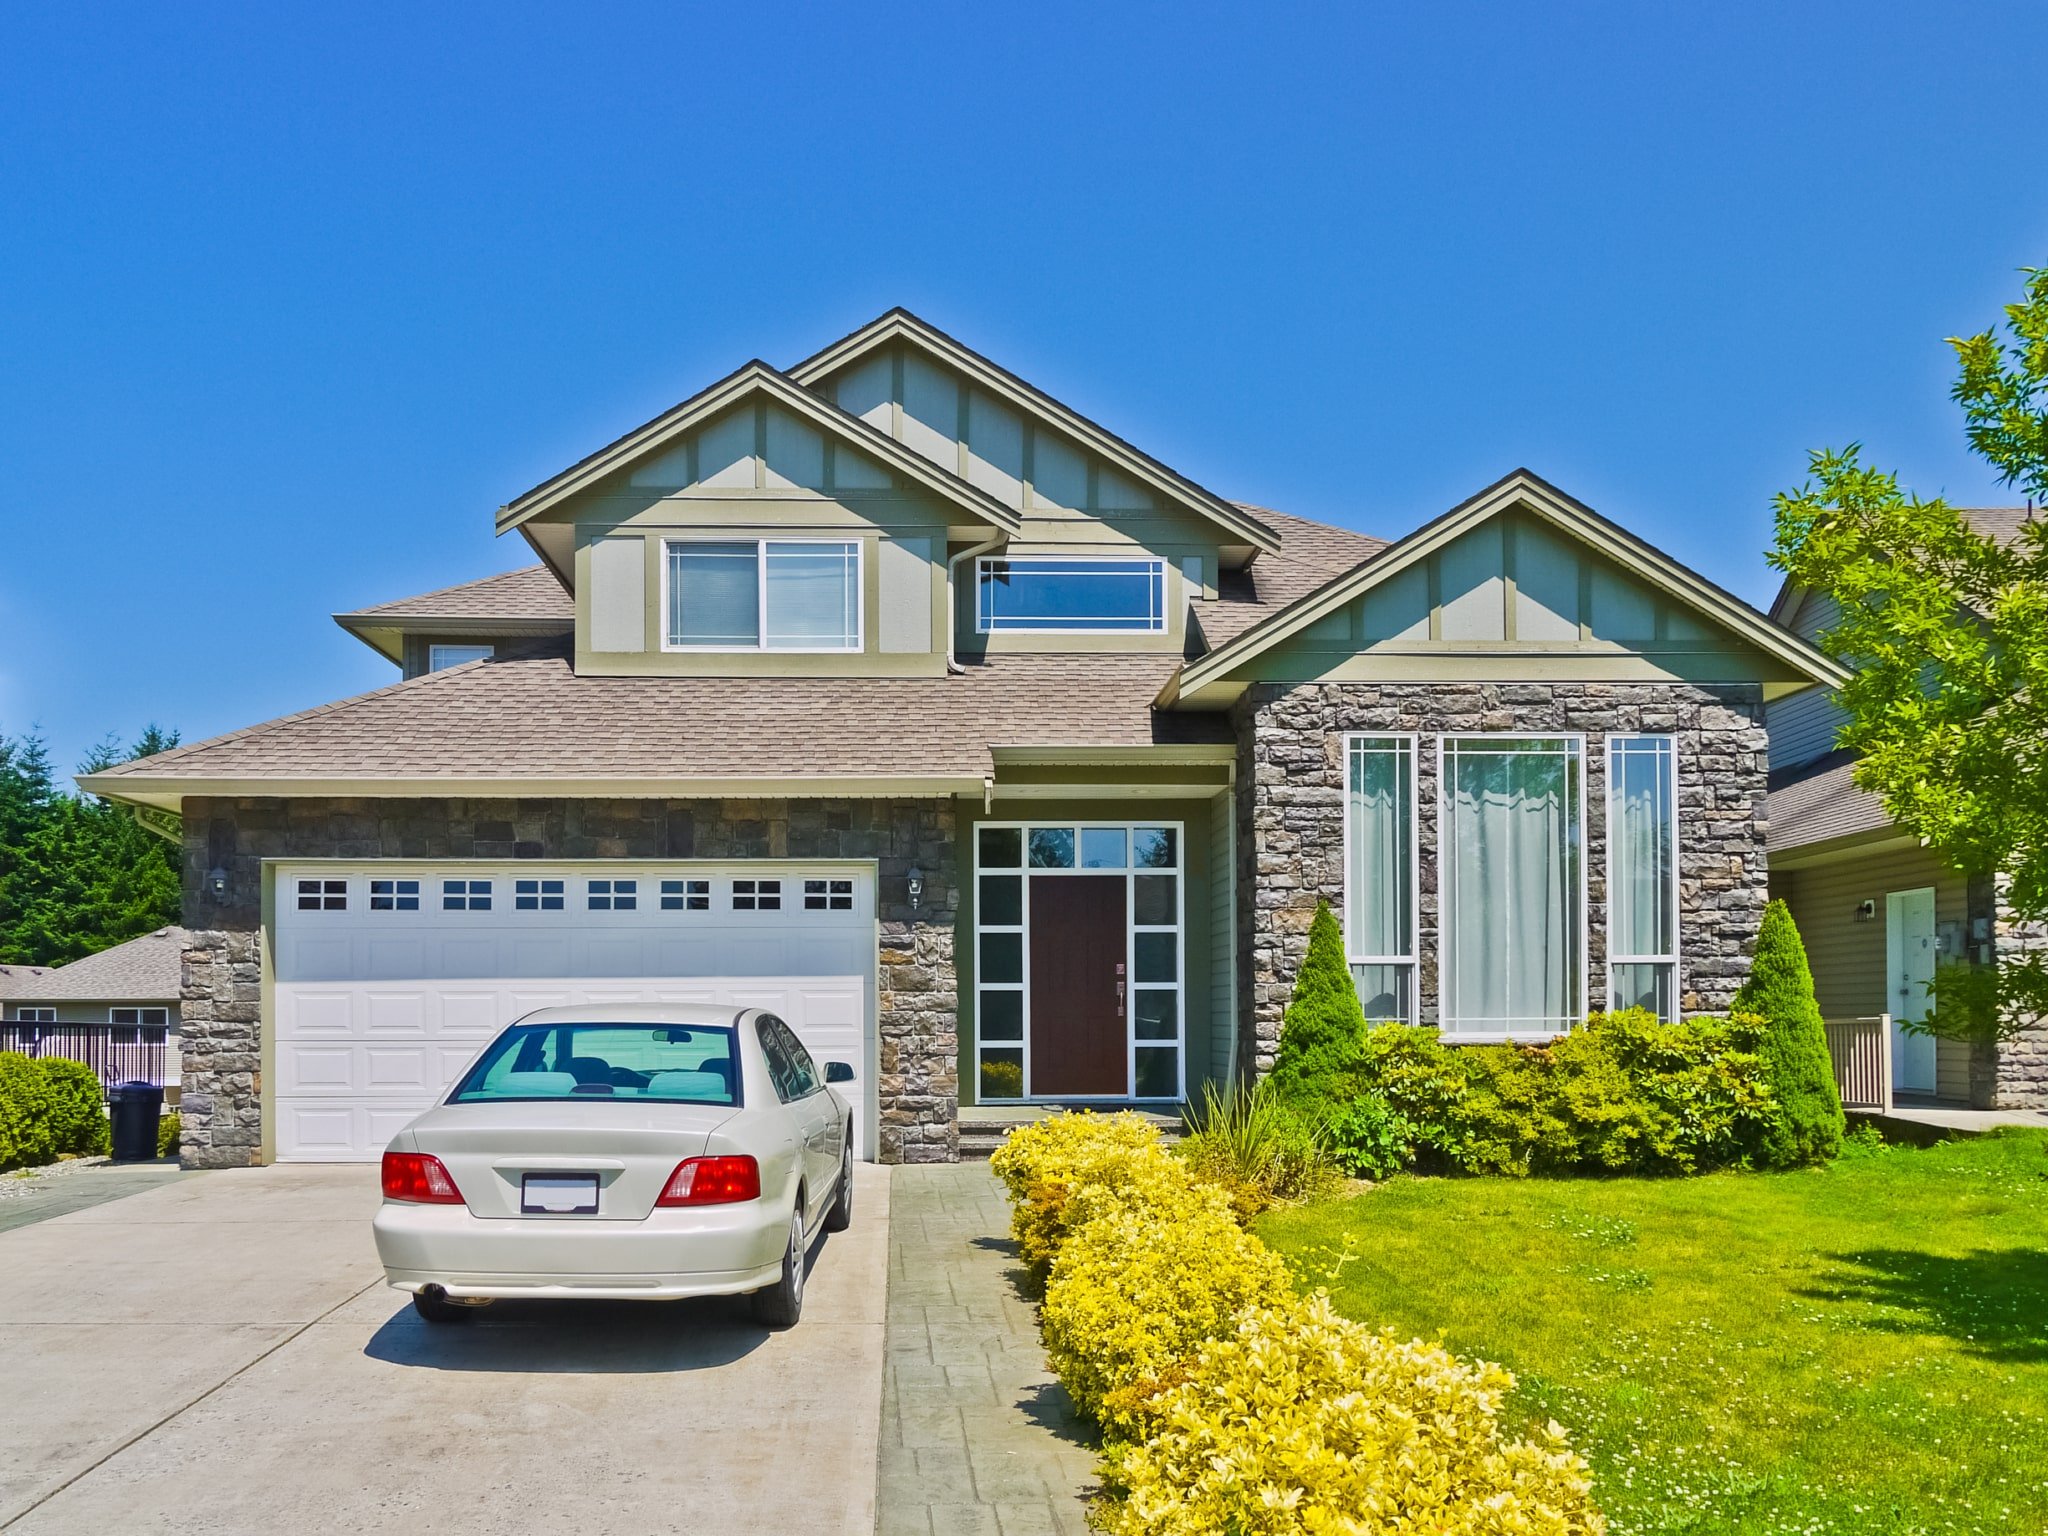 The Benefits and Limitations of Bundling Your Home and Auto Insurance